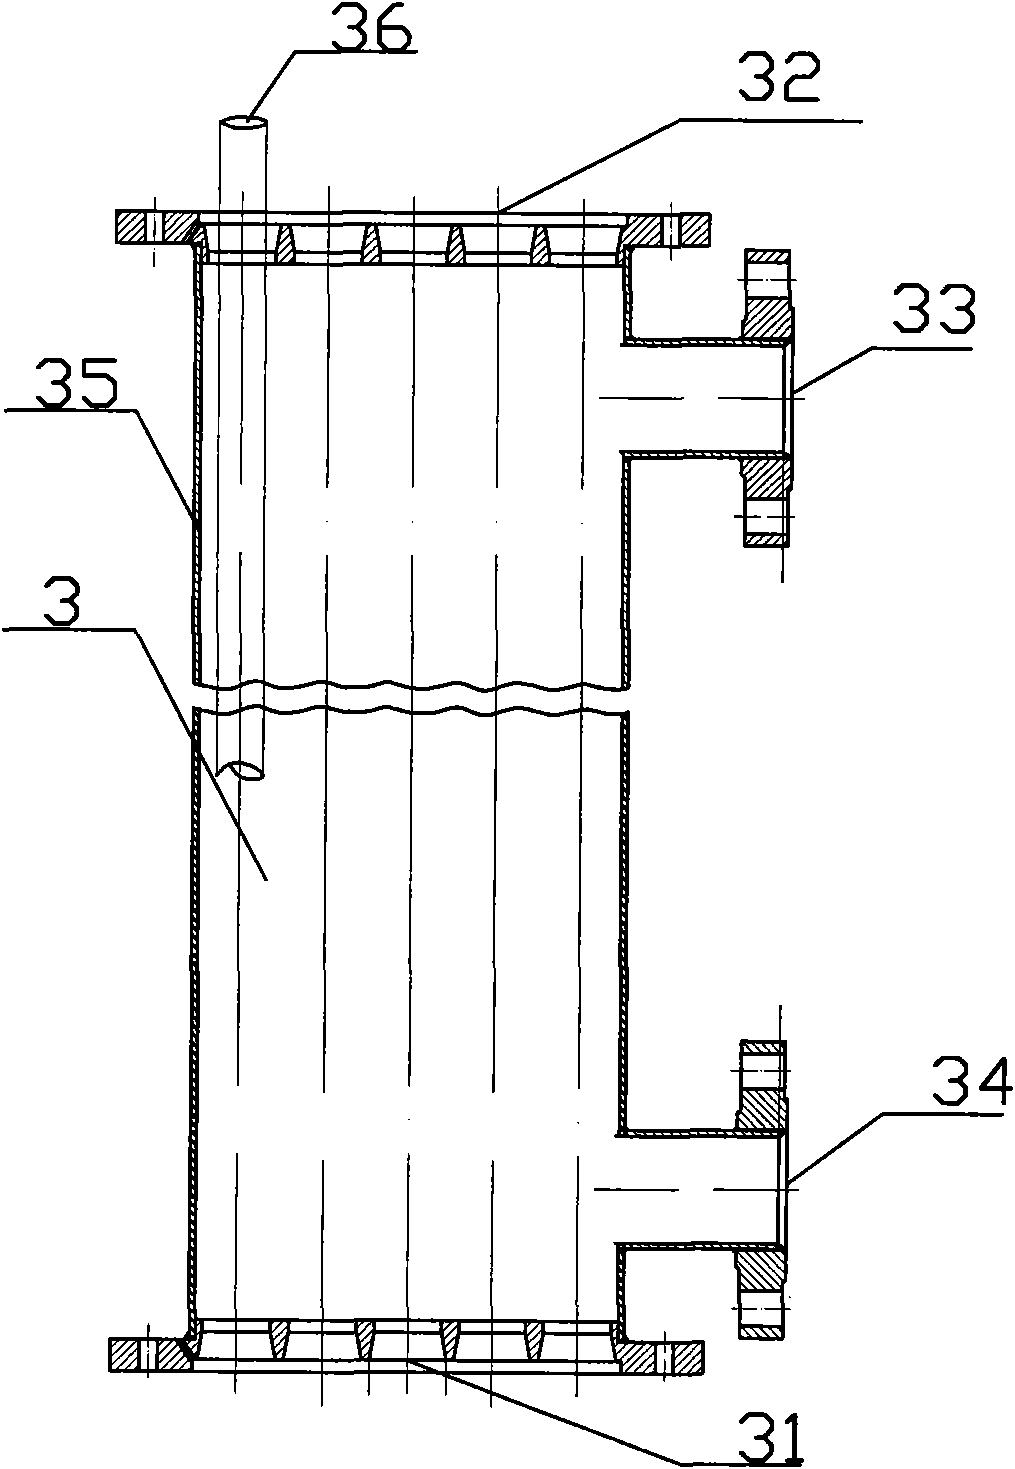 High-temperature condensed water recycling and purifying system with ceramic membrane filter